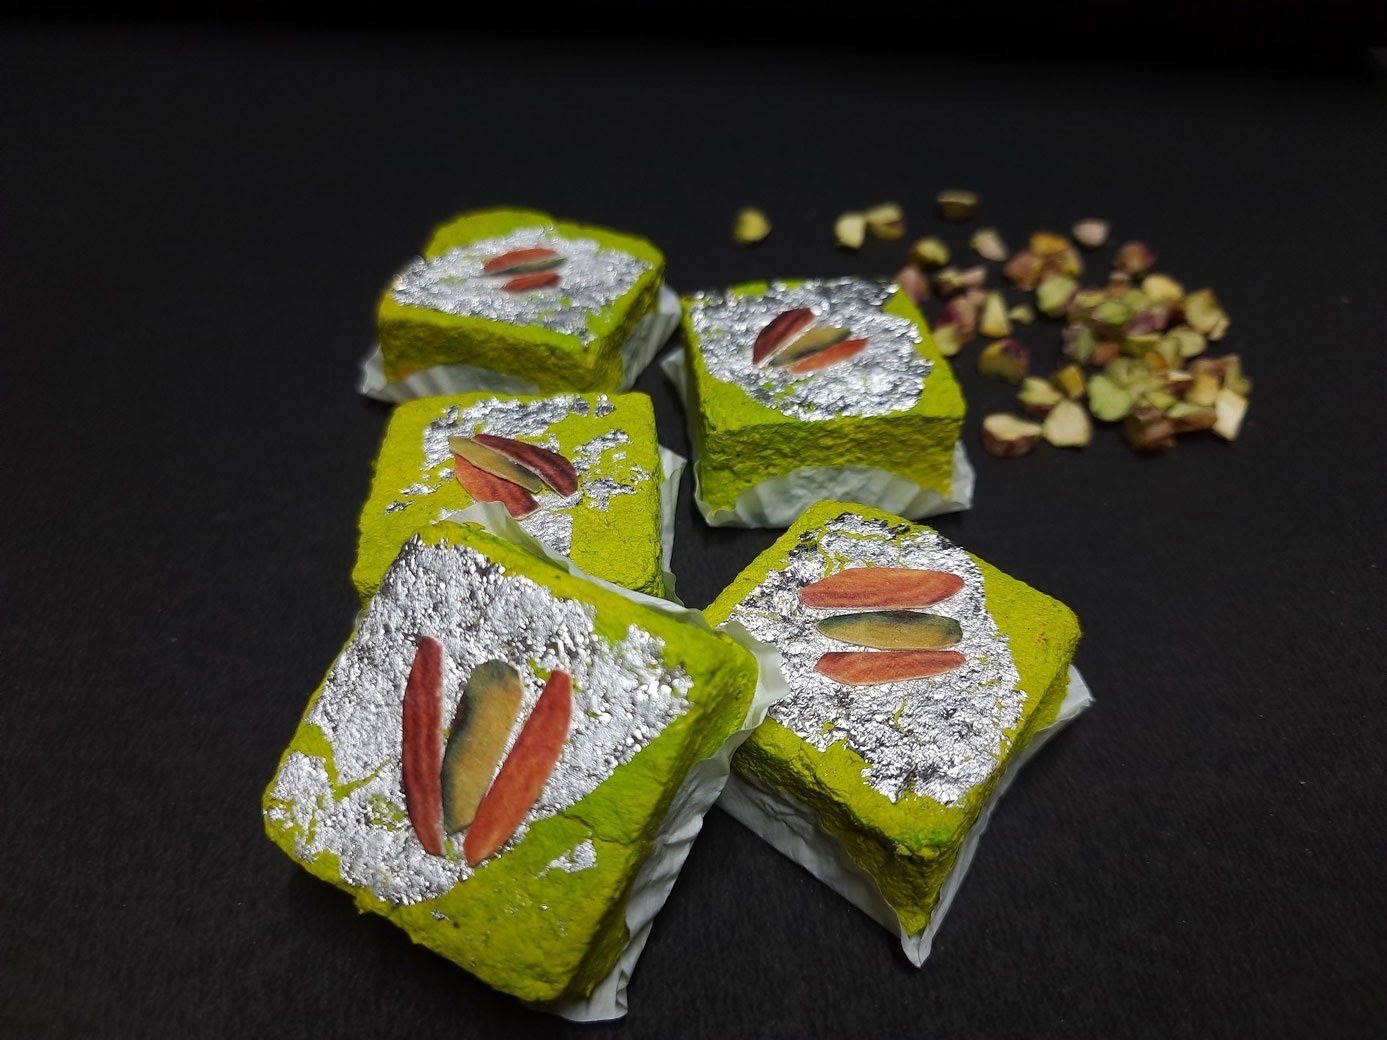 seed crackers and seed sweets